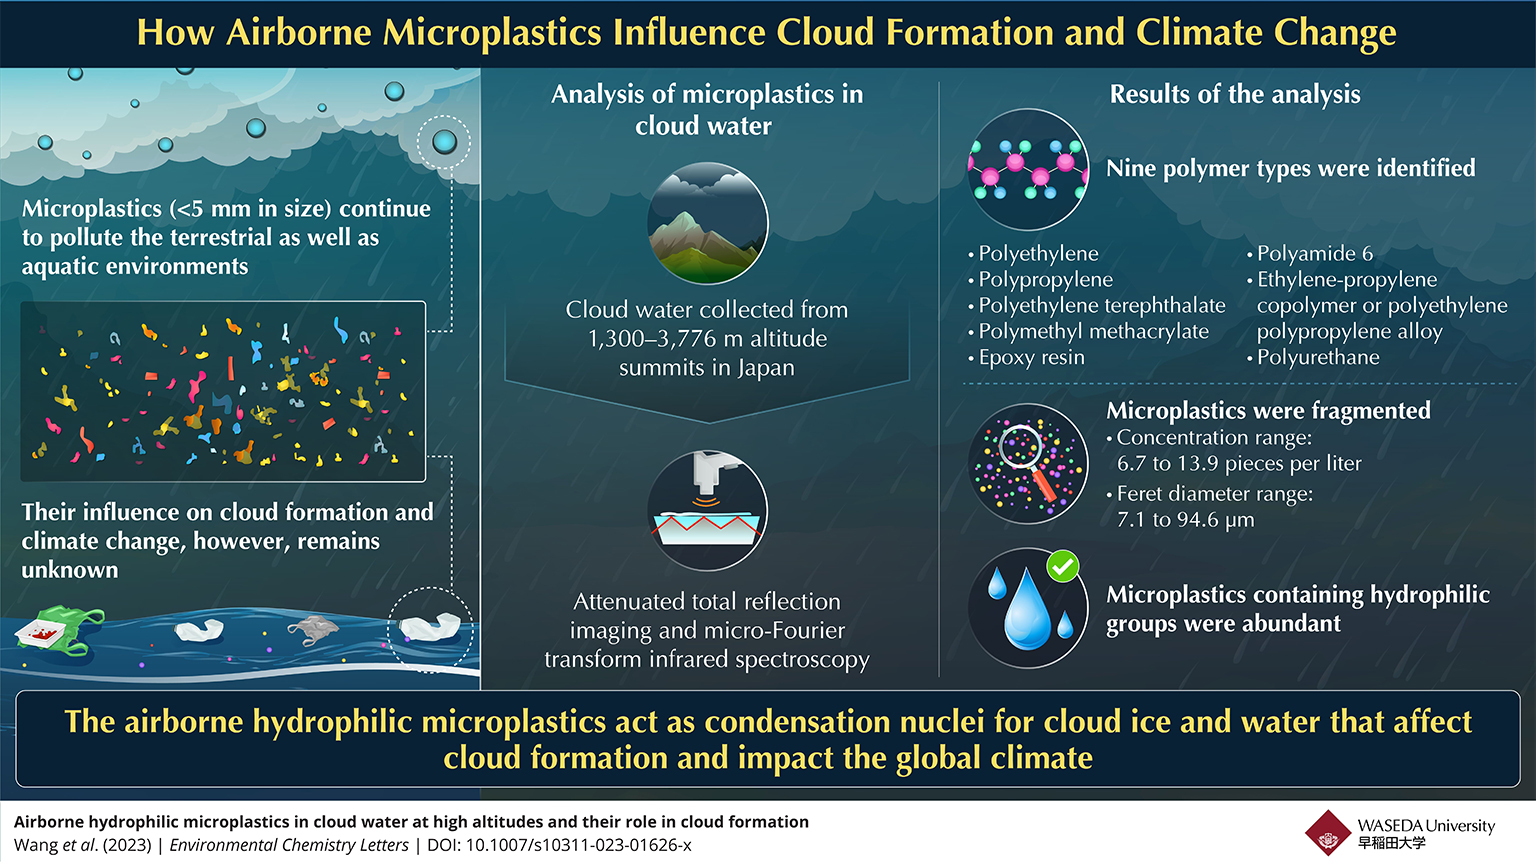 Infographic: Airborne hydrophilic microplastics in cloud water at high altitudes.